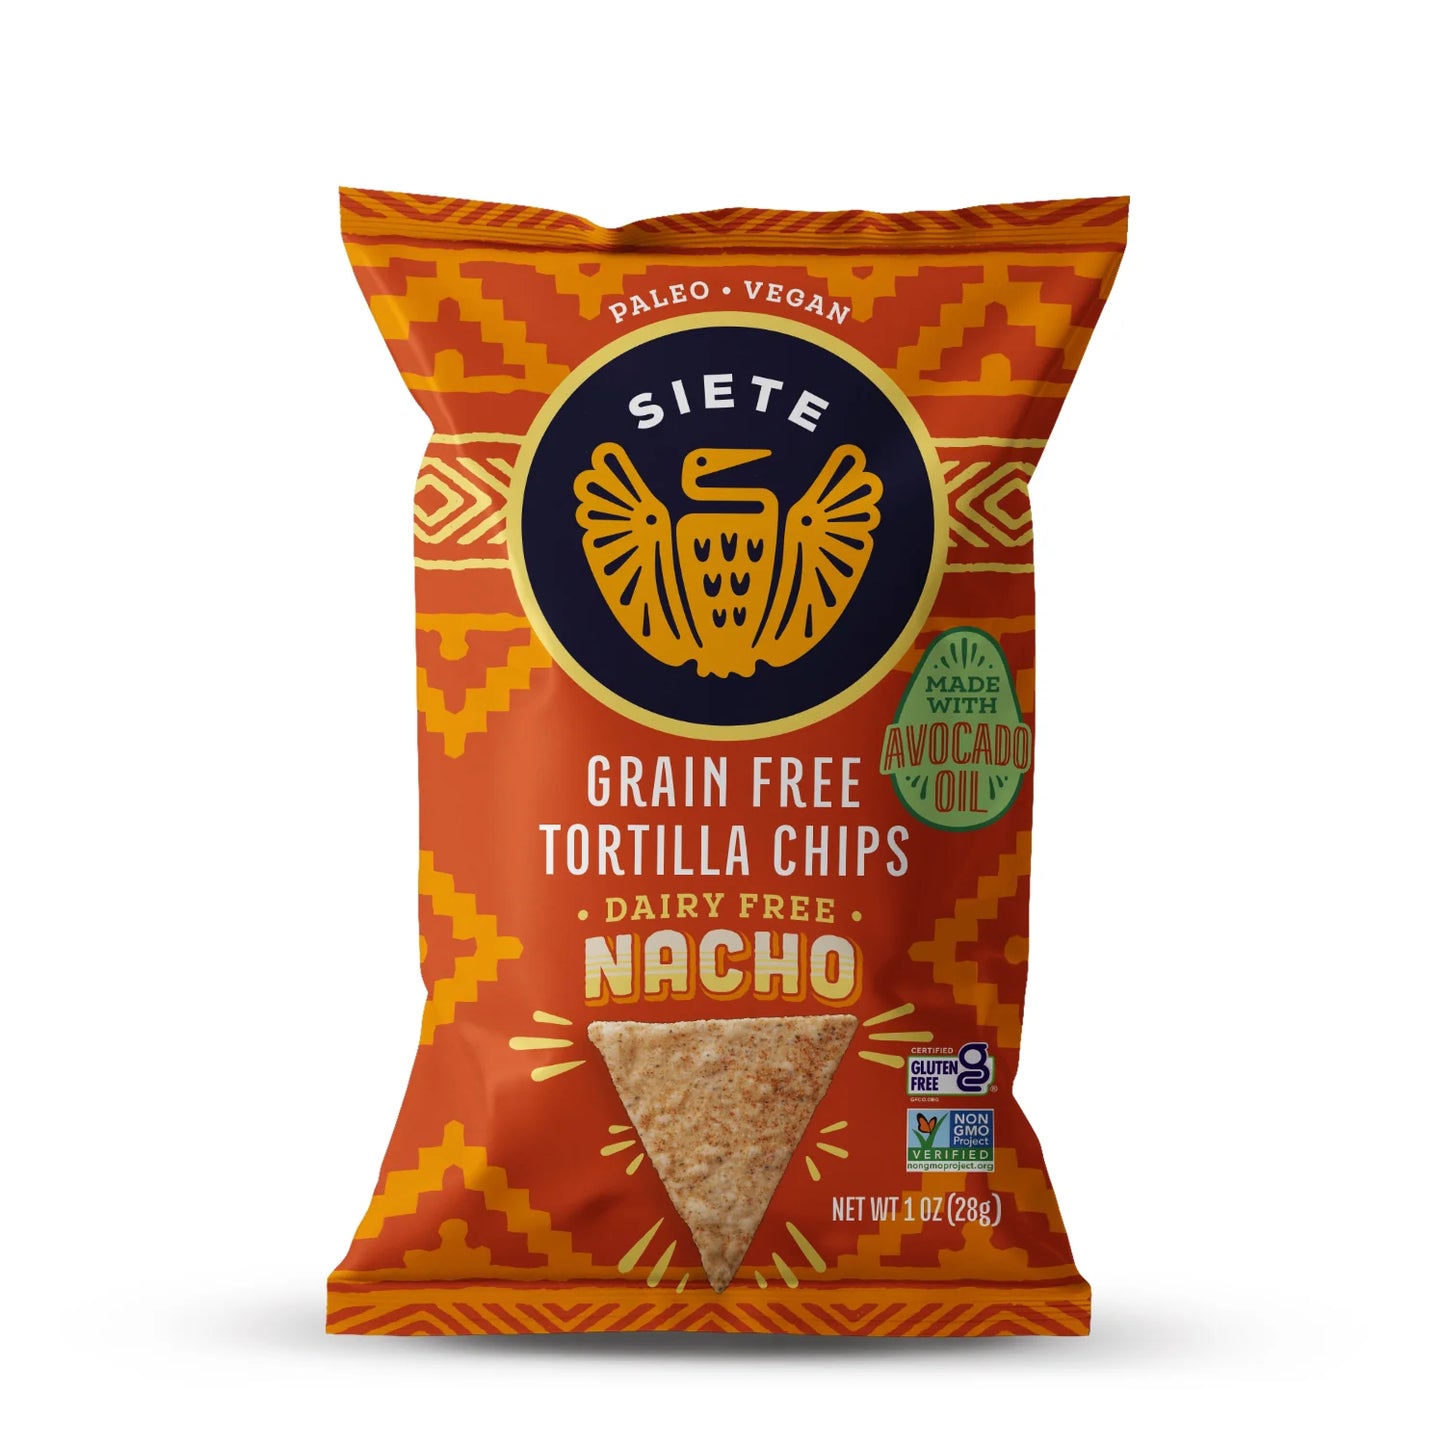 Grain-Free, Dairy-Free Tortilla Chips by Siete Foods - Snack Size